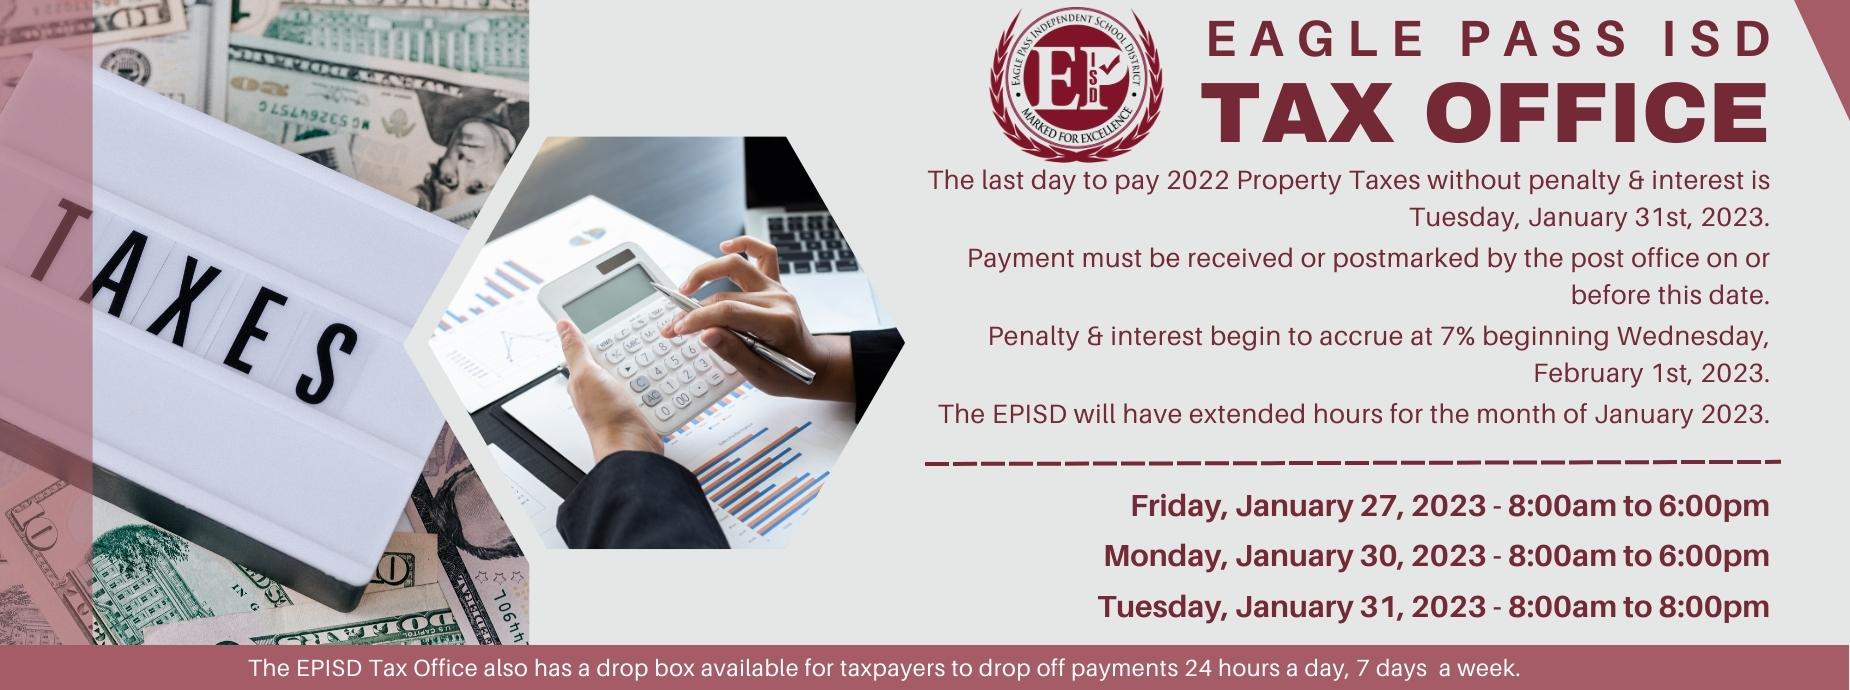 Tax Office banner. Tax Office extended hours: Friday, January 27, 2023 - 8:00am to 6:00pm. Monday, January 30, 2023 - 8:00am to 6:00pm. Tuesday, January 31, 2023 - 8:00am to 8:00pm. The EPISD Tax Office also has a drop box available for taxpayers to drop off payments 24 hours a day, 7 days  a week.